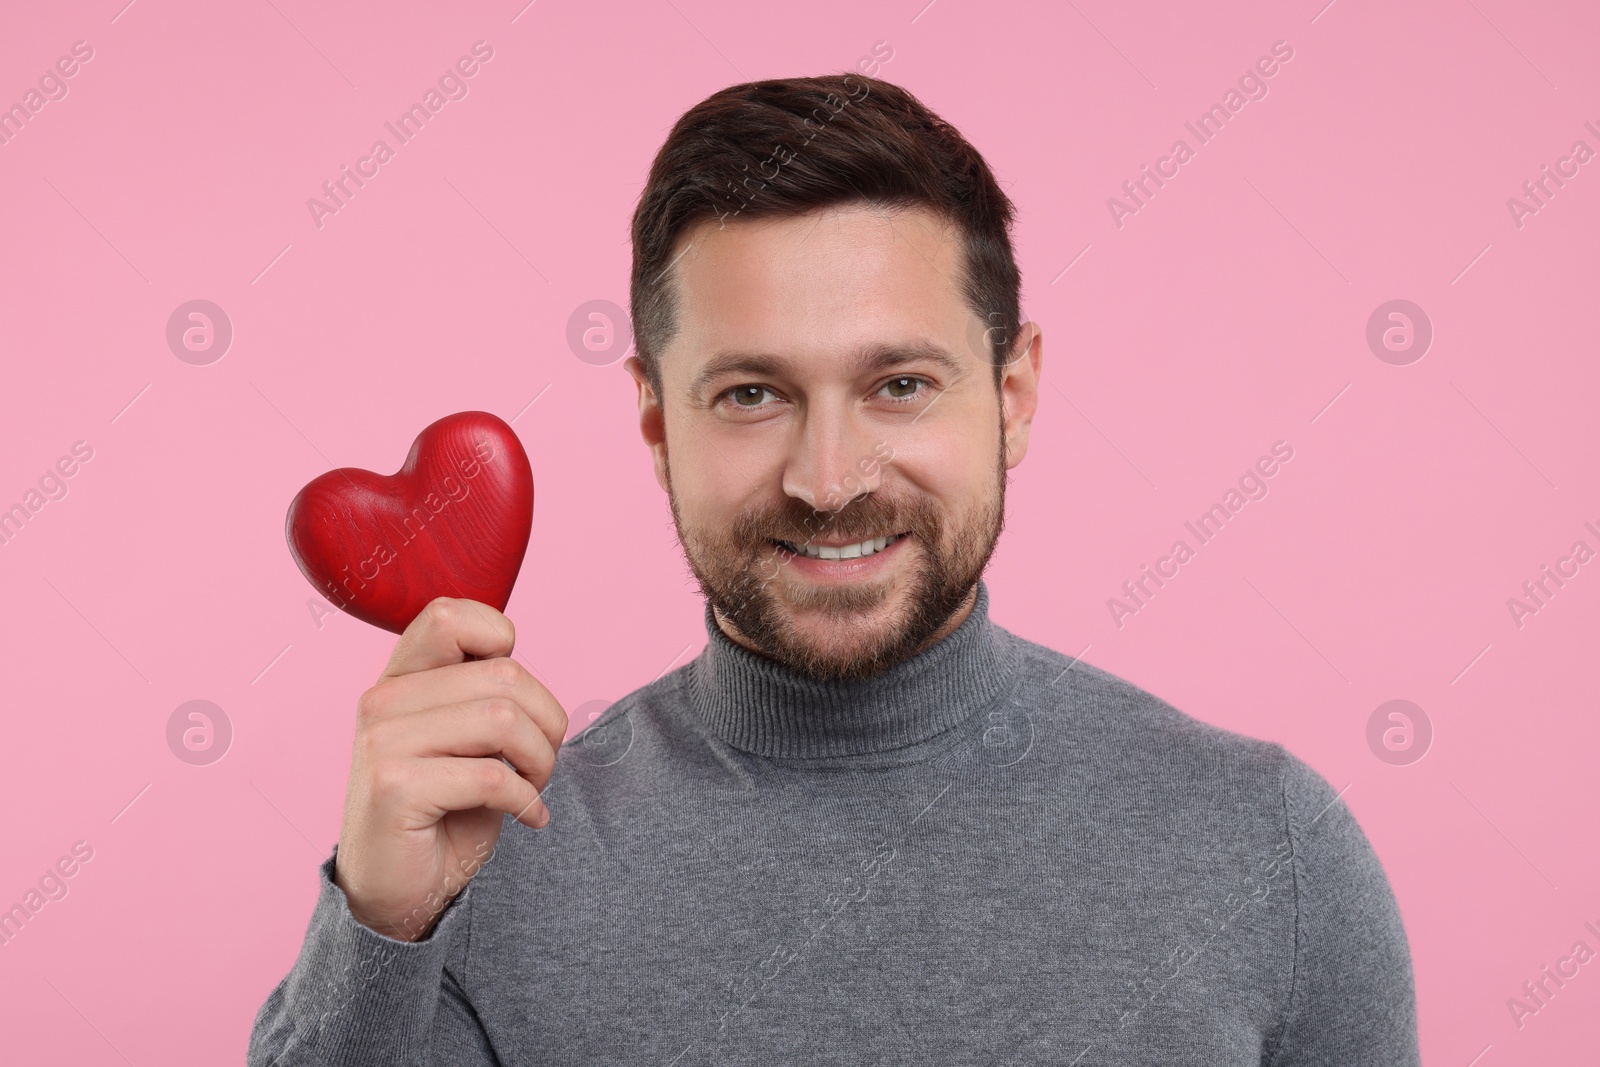 Photo of Happy man holding red heart on pink background